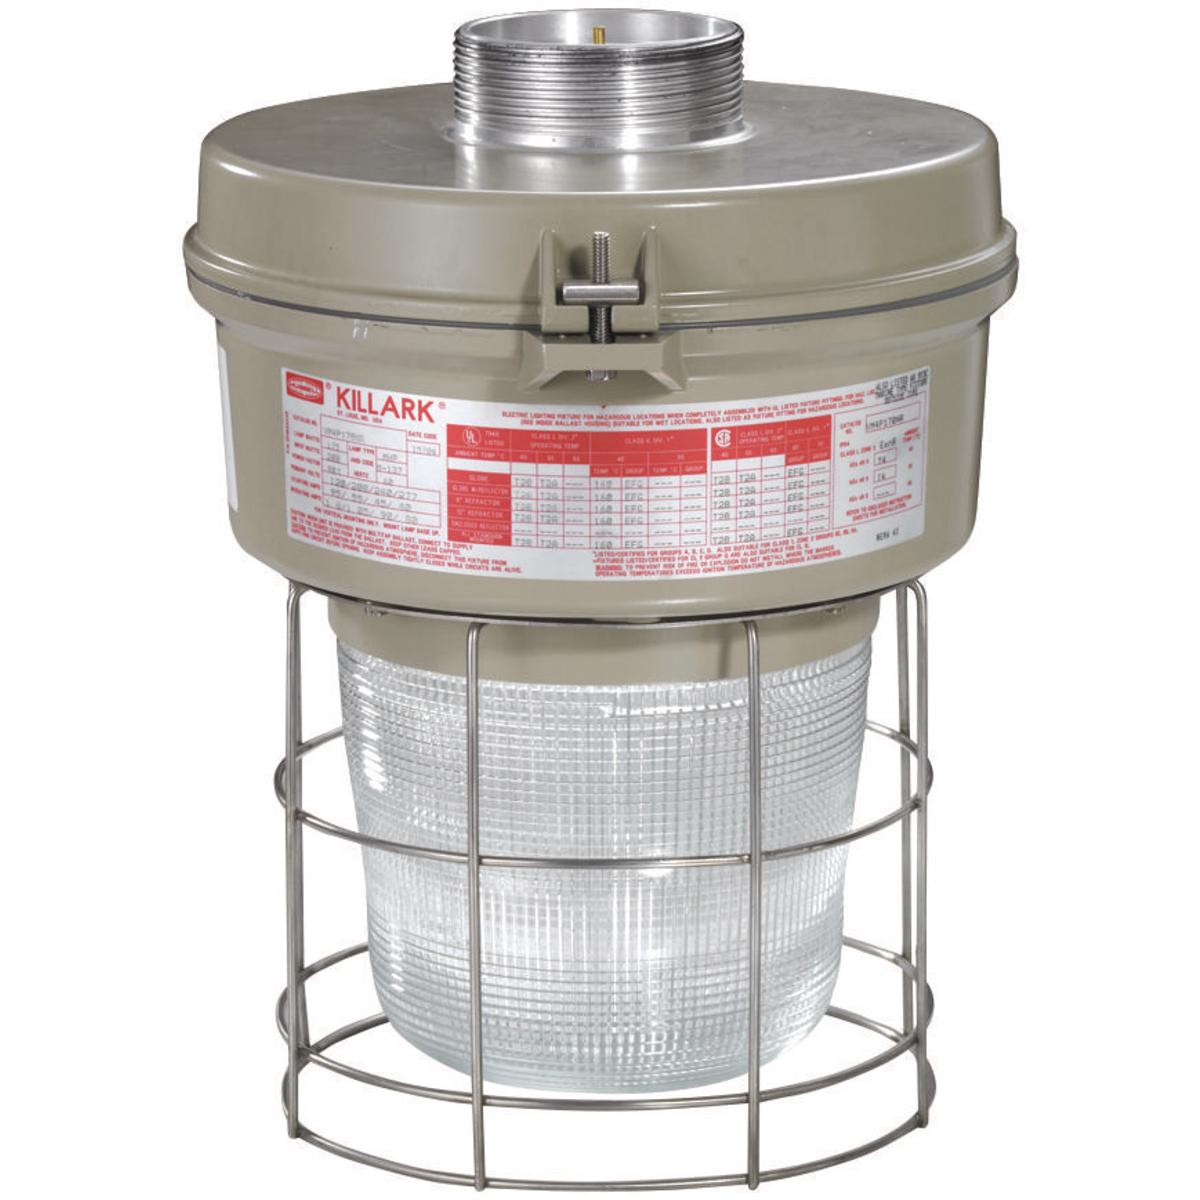 Hubbell VM4P150EZR1G VM4 Series - 150W Metal Halide Quadri-Volt - EZ Mount Adapter - Type I Glass Refractor and Guard  ; Ballast tank and splice box – corrosion resistant copper-free aluminum alloy with baked powder epoxy/polyester finish, electrostatically applied for comple